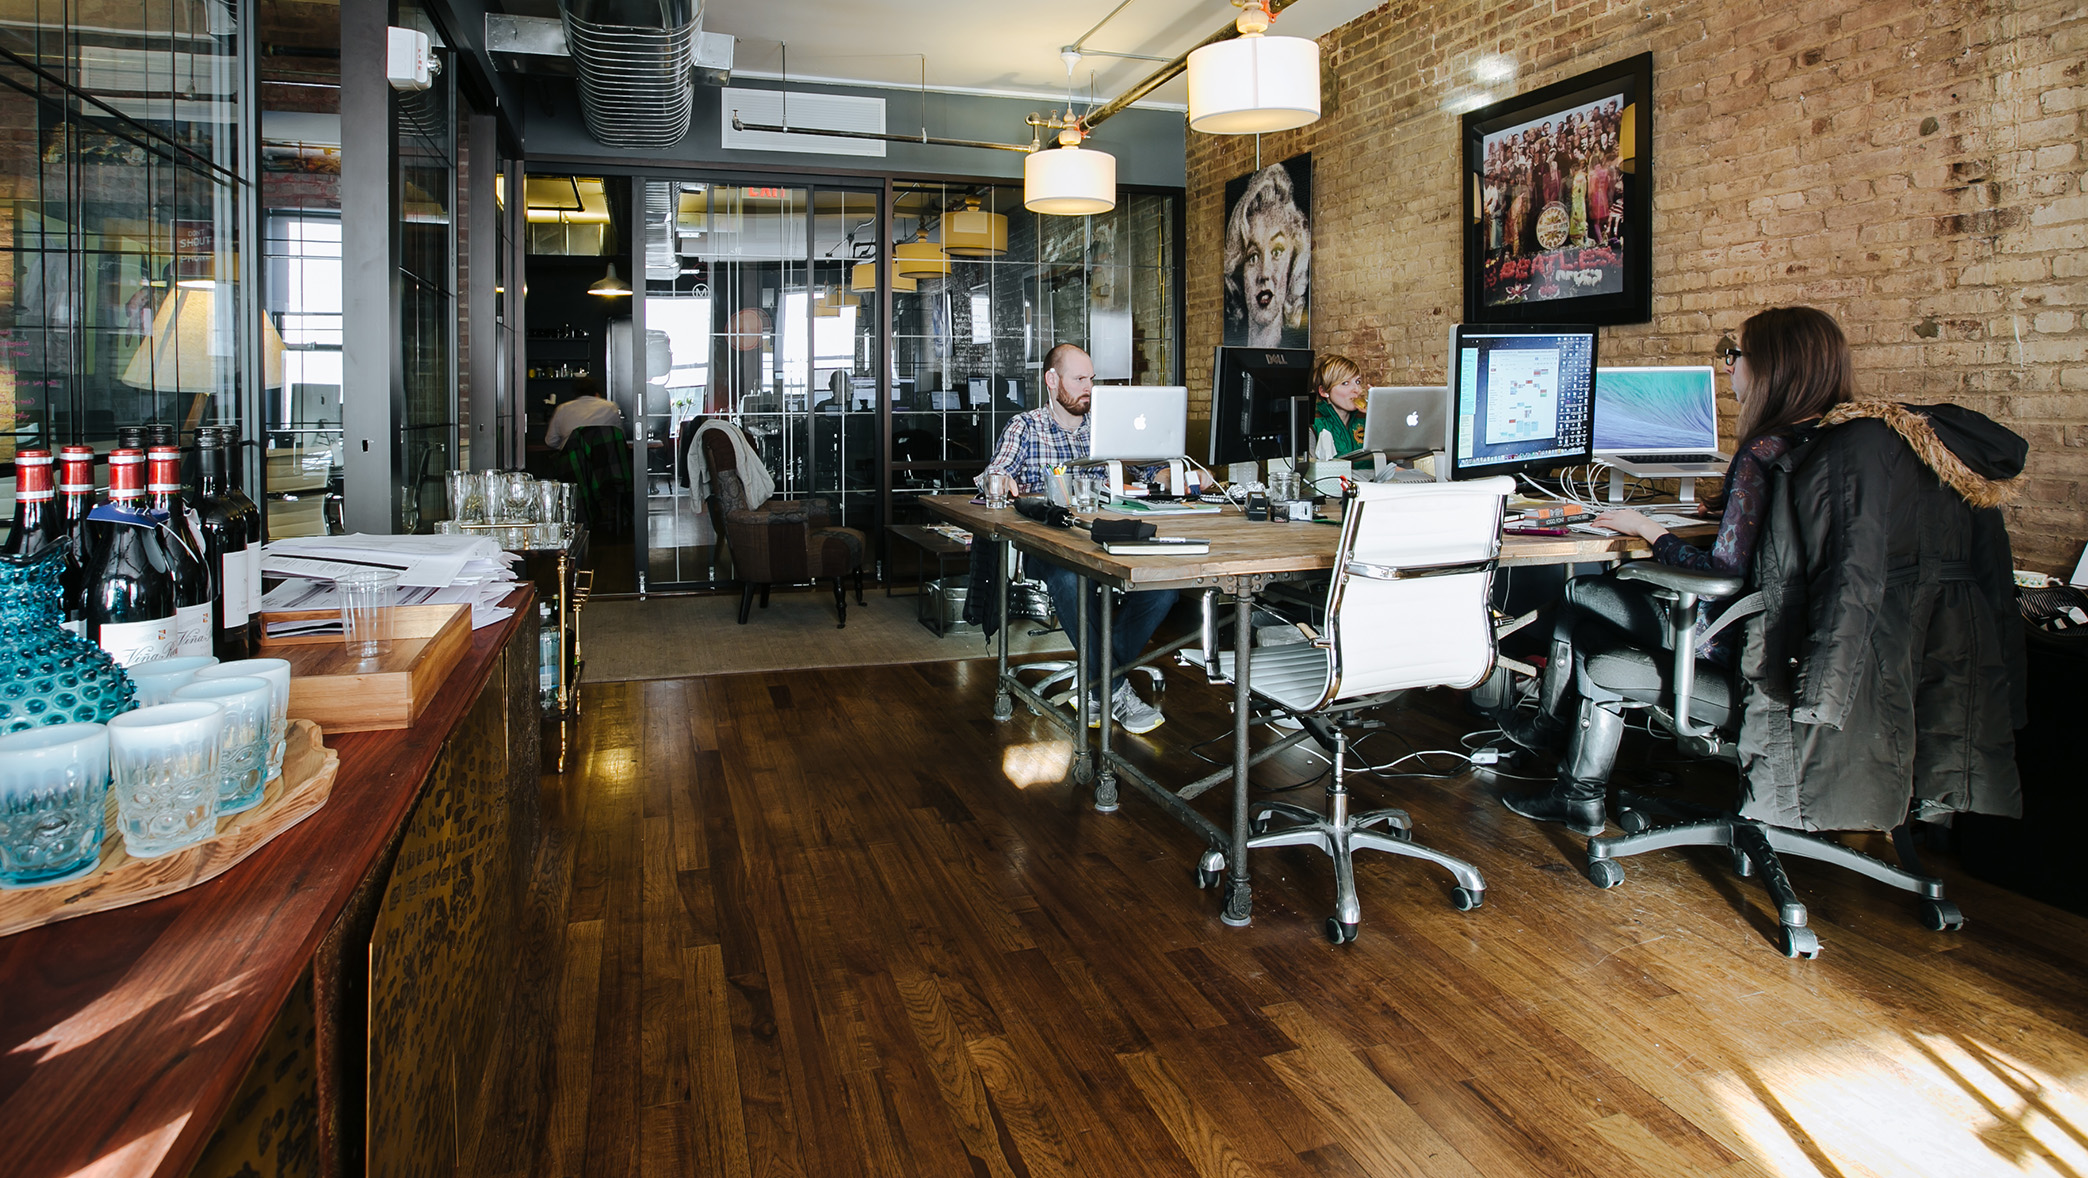 WeWork Meatpacking office in New York.
